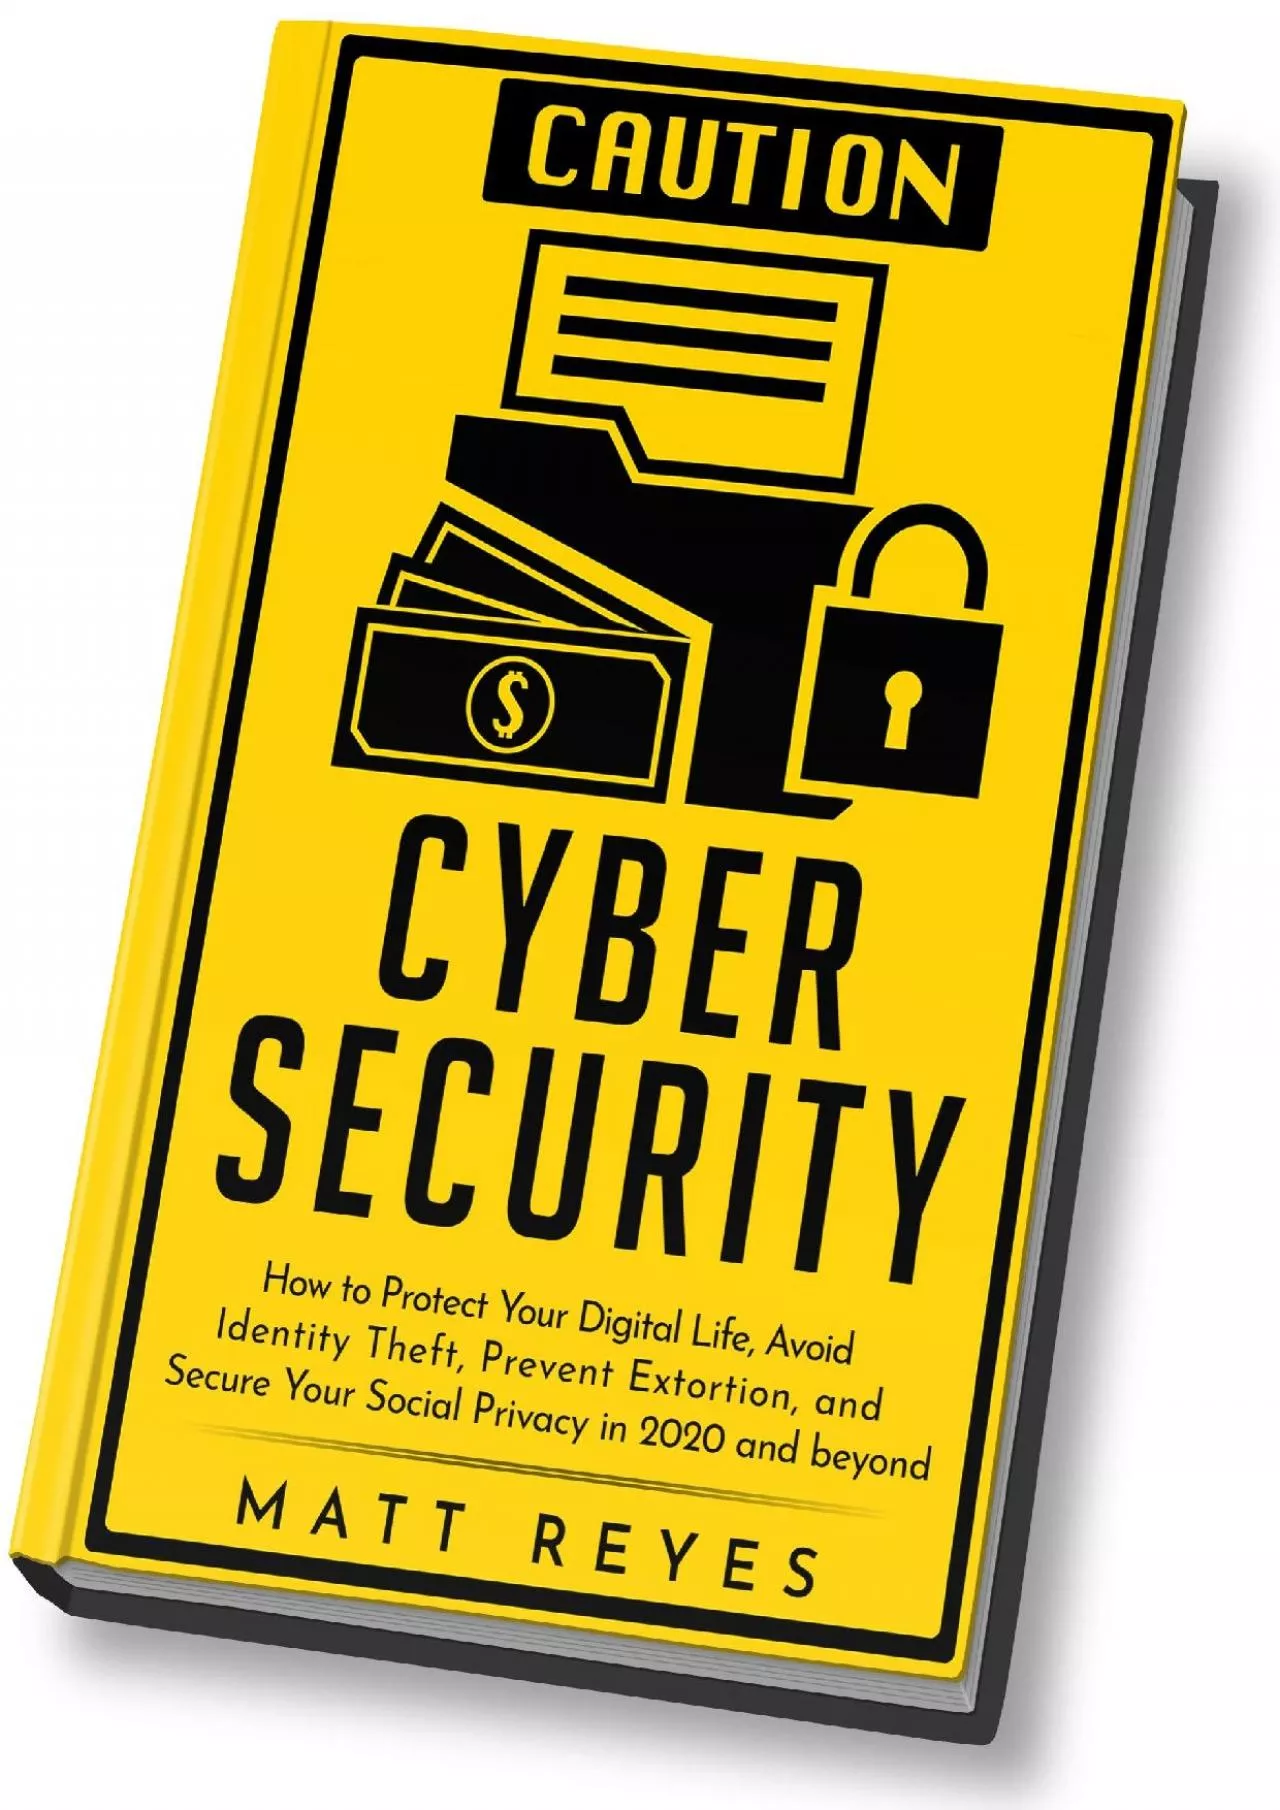 [READ]-Cyber Security: How to Protect Your Digital Life, Avoid Identity Theft, Prevent